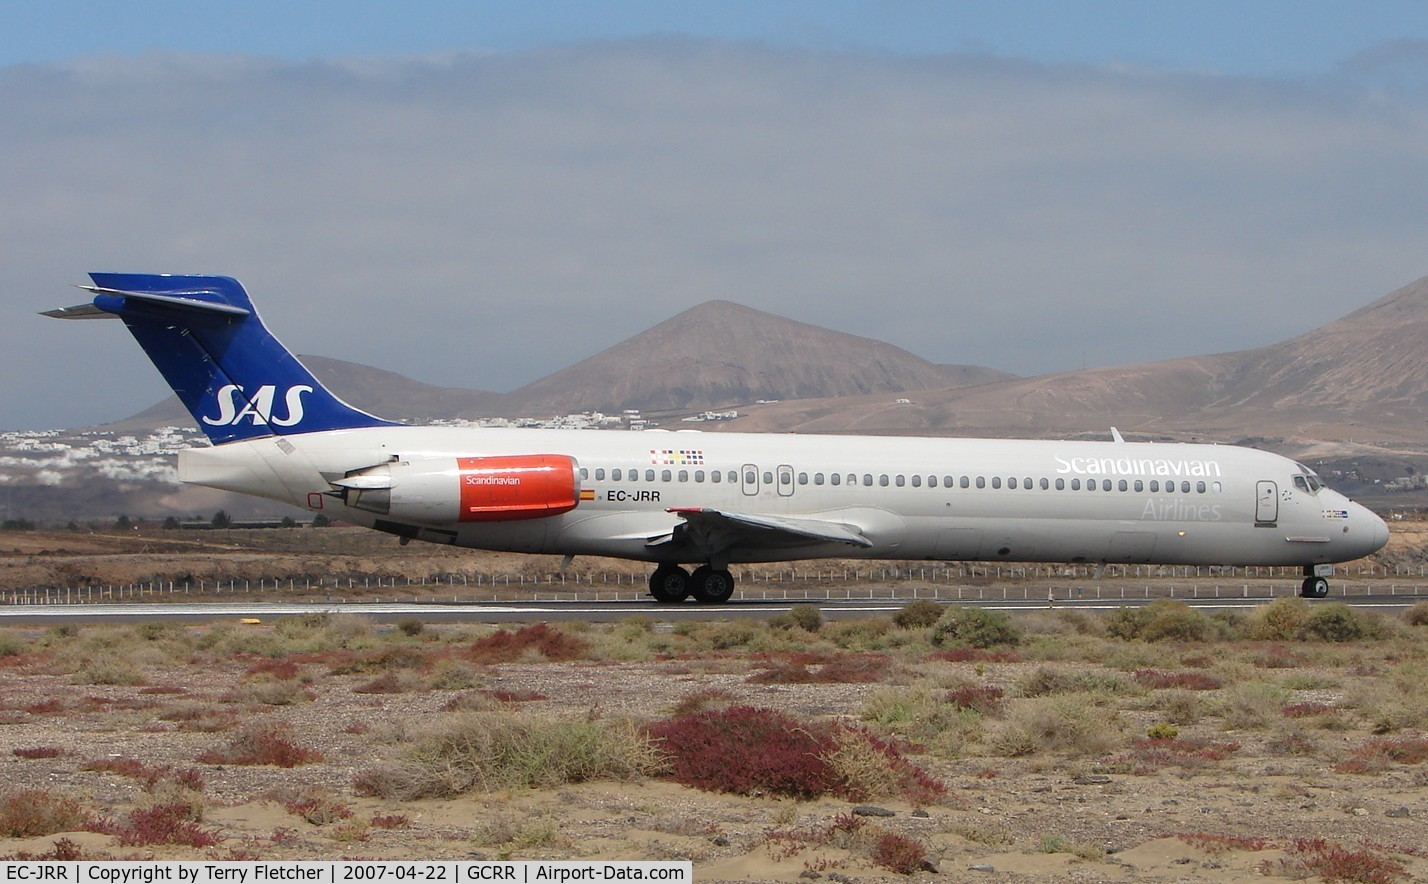 EC-JRR, 1991 McDonnell Douglas MD-87 (DC-9-87) C/N 49612, Although in full SAS colurs - aircraft wears Spanish register marks on lease